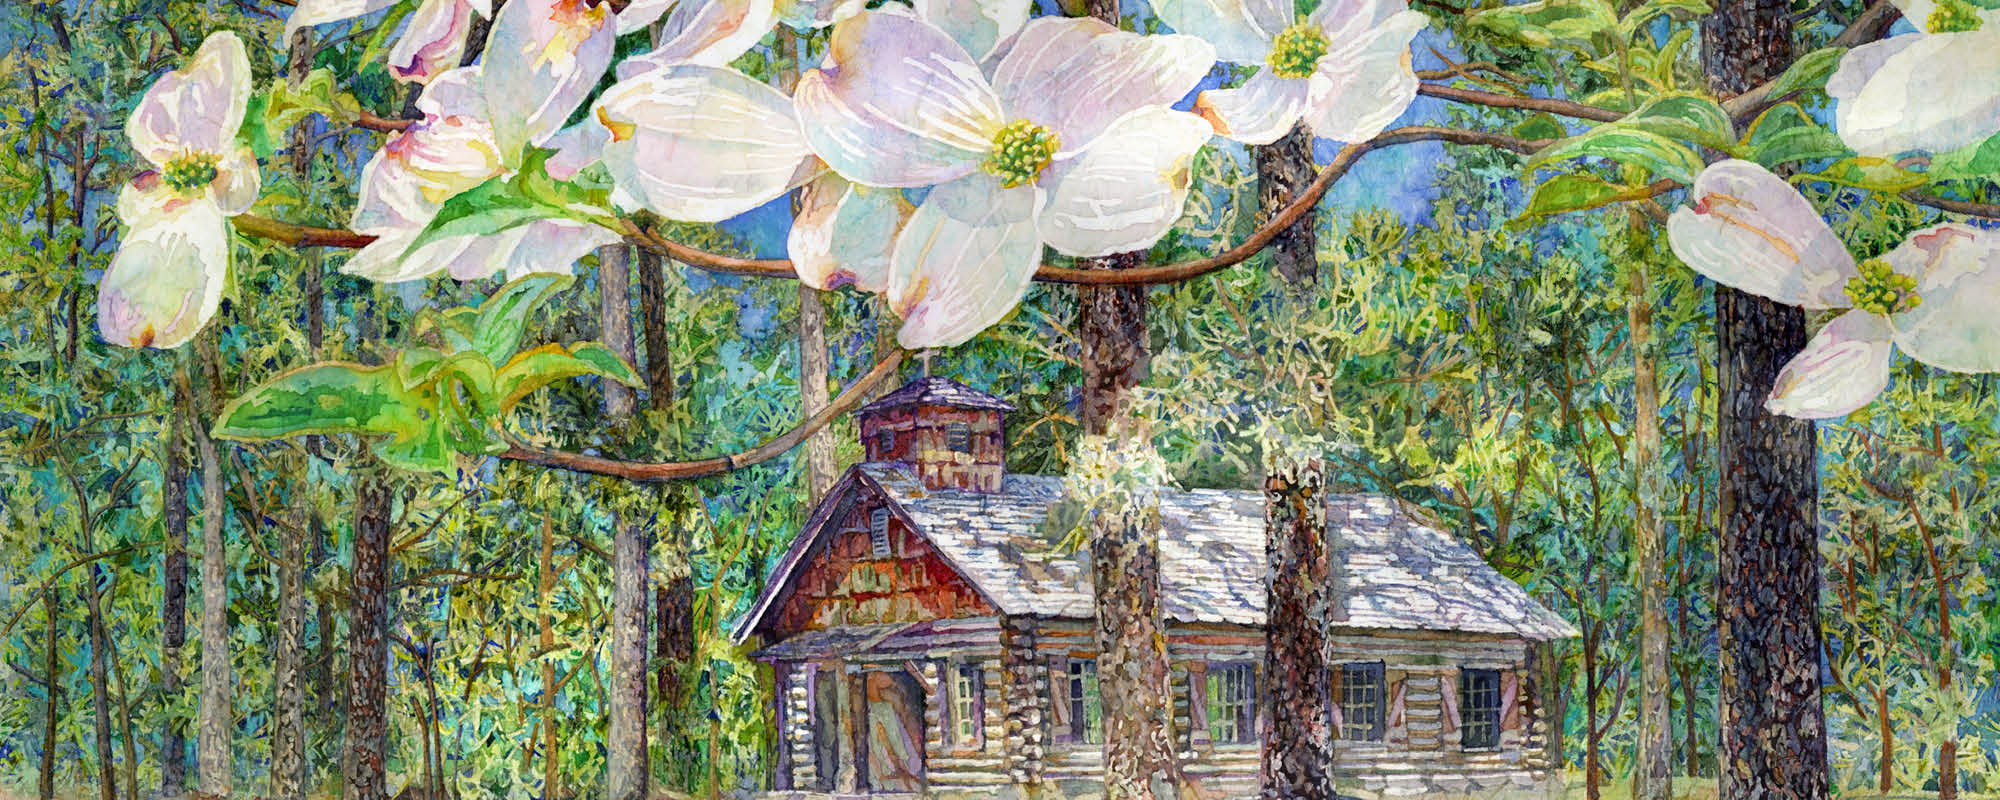 A Spanish mission building at Mission Tejas State Park, TX stands on a carpet of needles, cones, and leaves. Tall pineywoods create large pockets of shade and white dogwood blossoms cover the top of the painting.